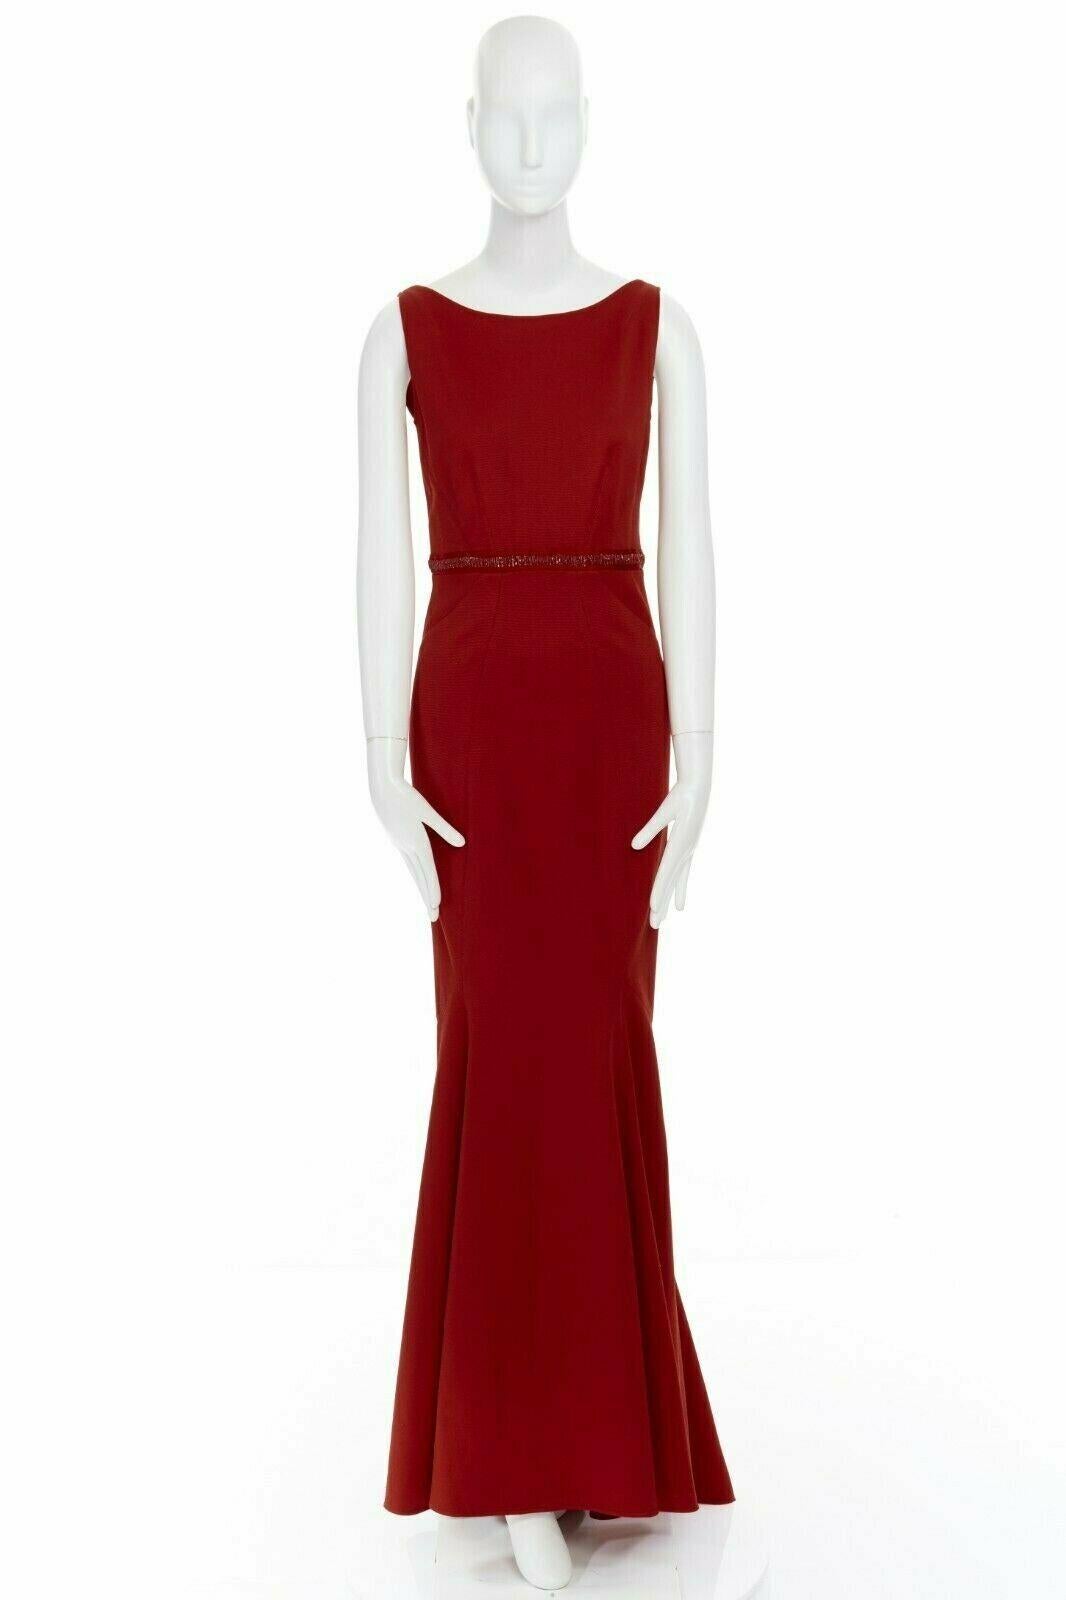 ZAC POSEN red bead embellished waist open back stretch flared hem ball gown M 
Reference: LACG/A00356 
Brand: Zac Posen 
Designer: Zac Posen 
Color: Red 
Pattern: Solid 
Closure: Zip 
Extra Detail: Scarlet red. Bateau neckline. Angular seams. Red